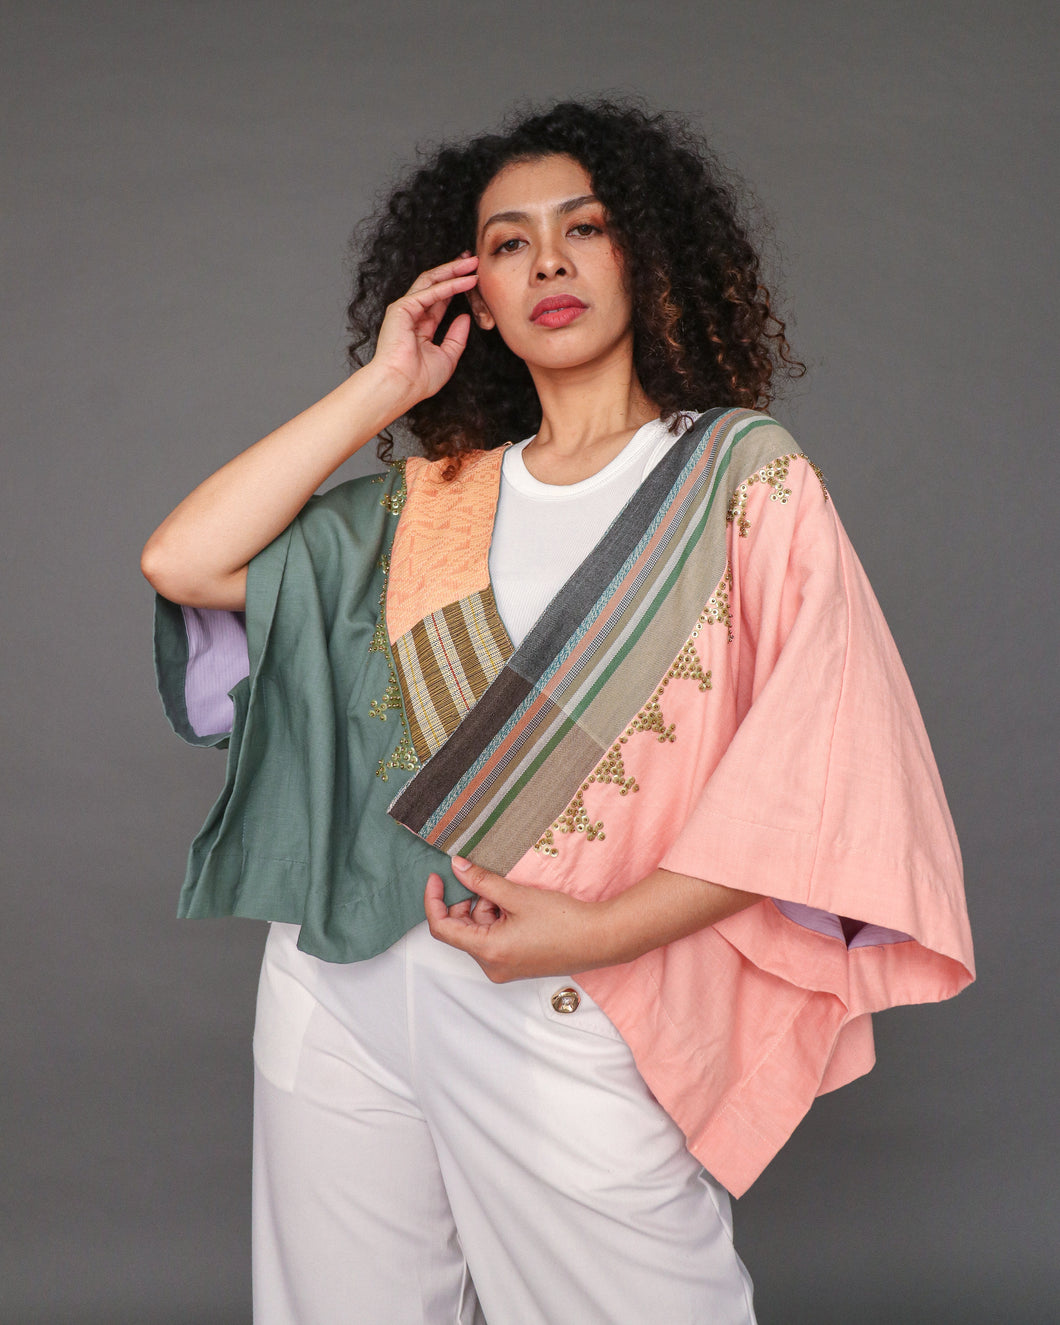 Yakan Peach and Rare Negros Green Heritage Poncho in Soft Linen with Hand Embroidery and Lining